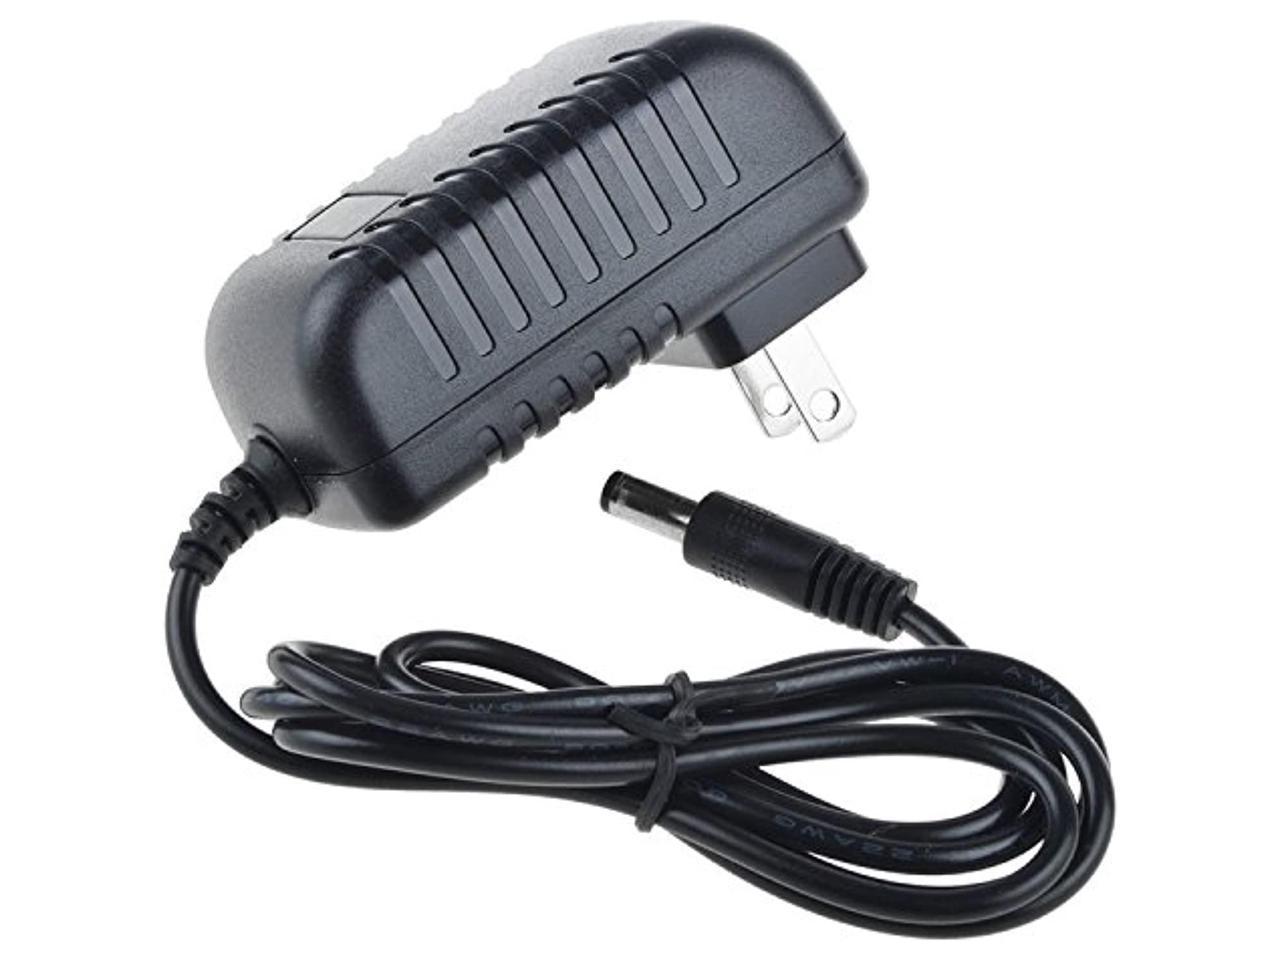 PK-Power AC DC Adapter charger for G-Project G-BOOM G-650 G650 Wireless Bluetooth Boombox Speaker Power Supply Cord 